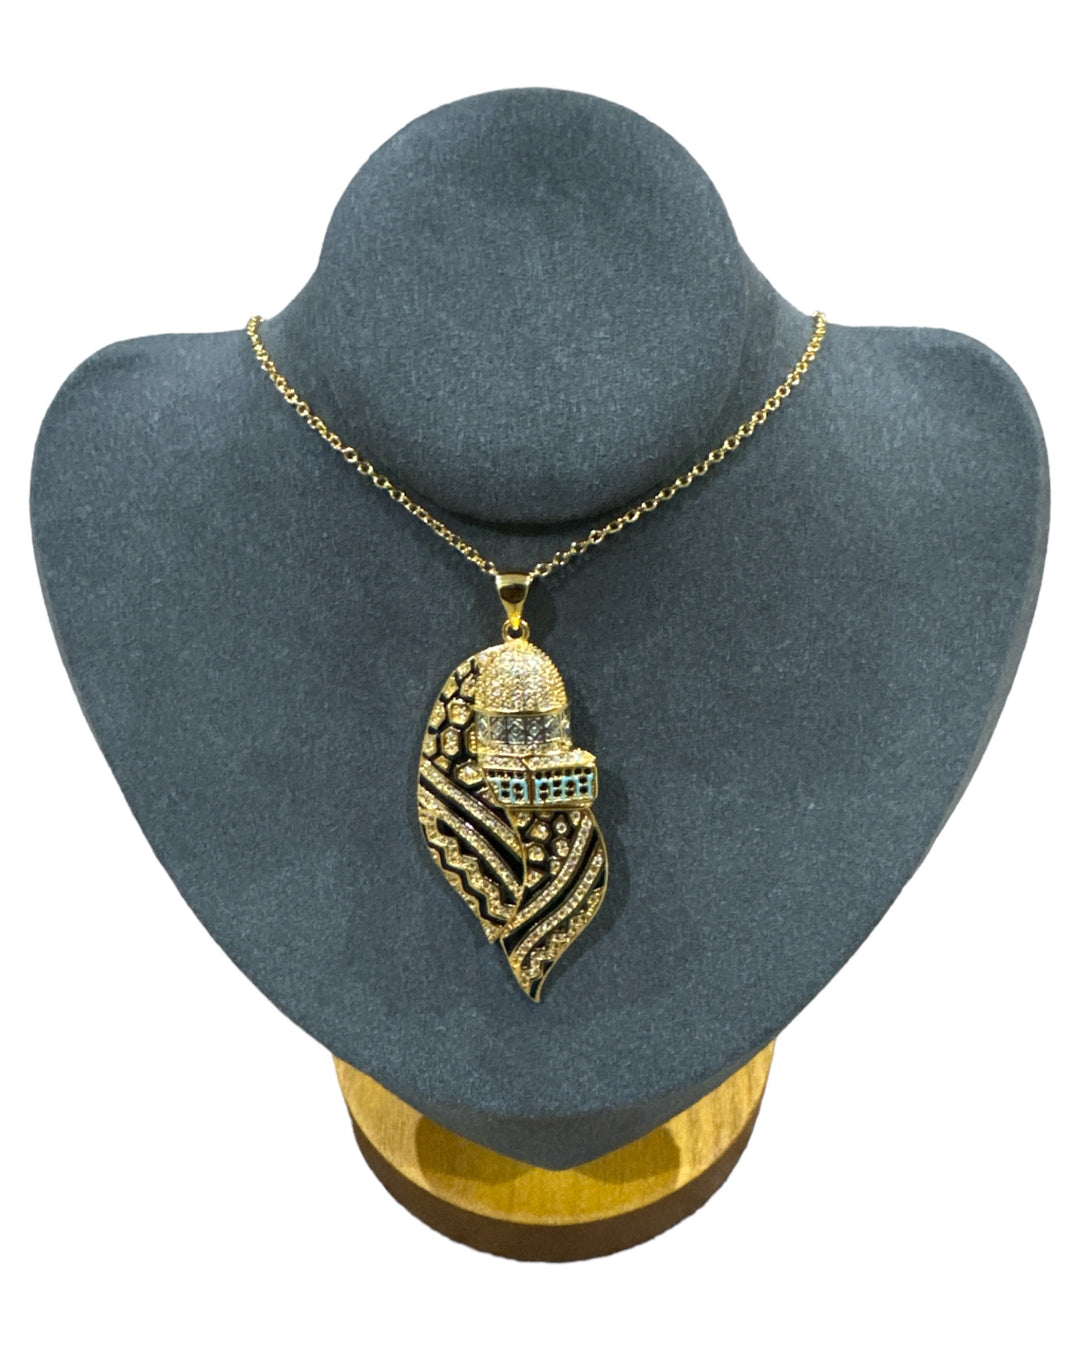 Draped in Tradition: Gold Dome of the Rock Necklace with Keffiyeh & Crystal Embellishments